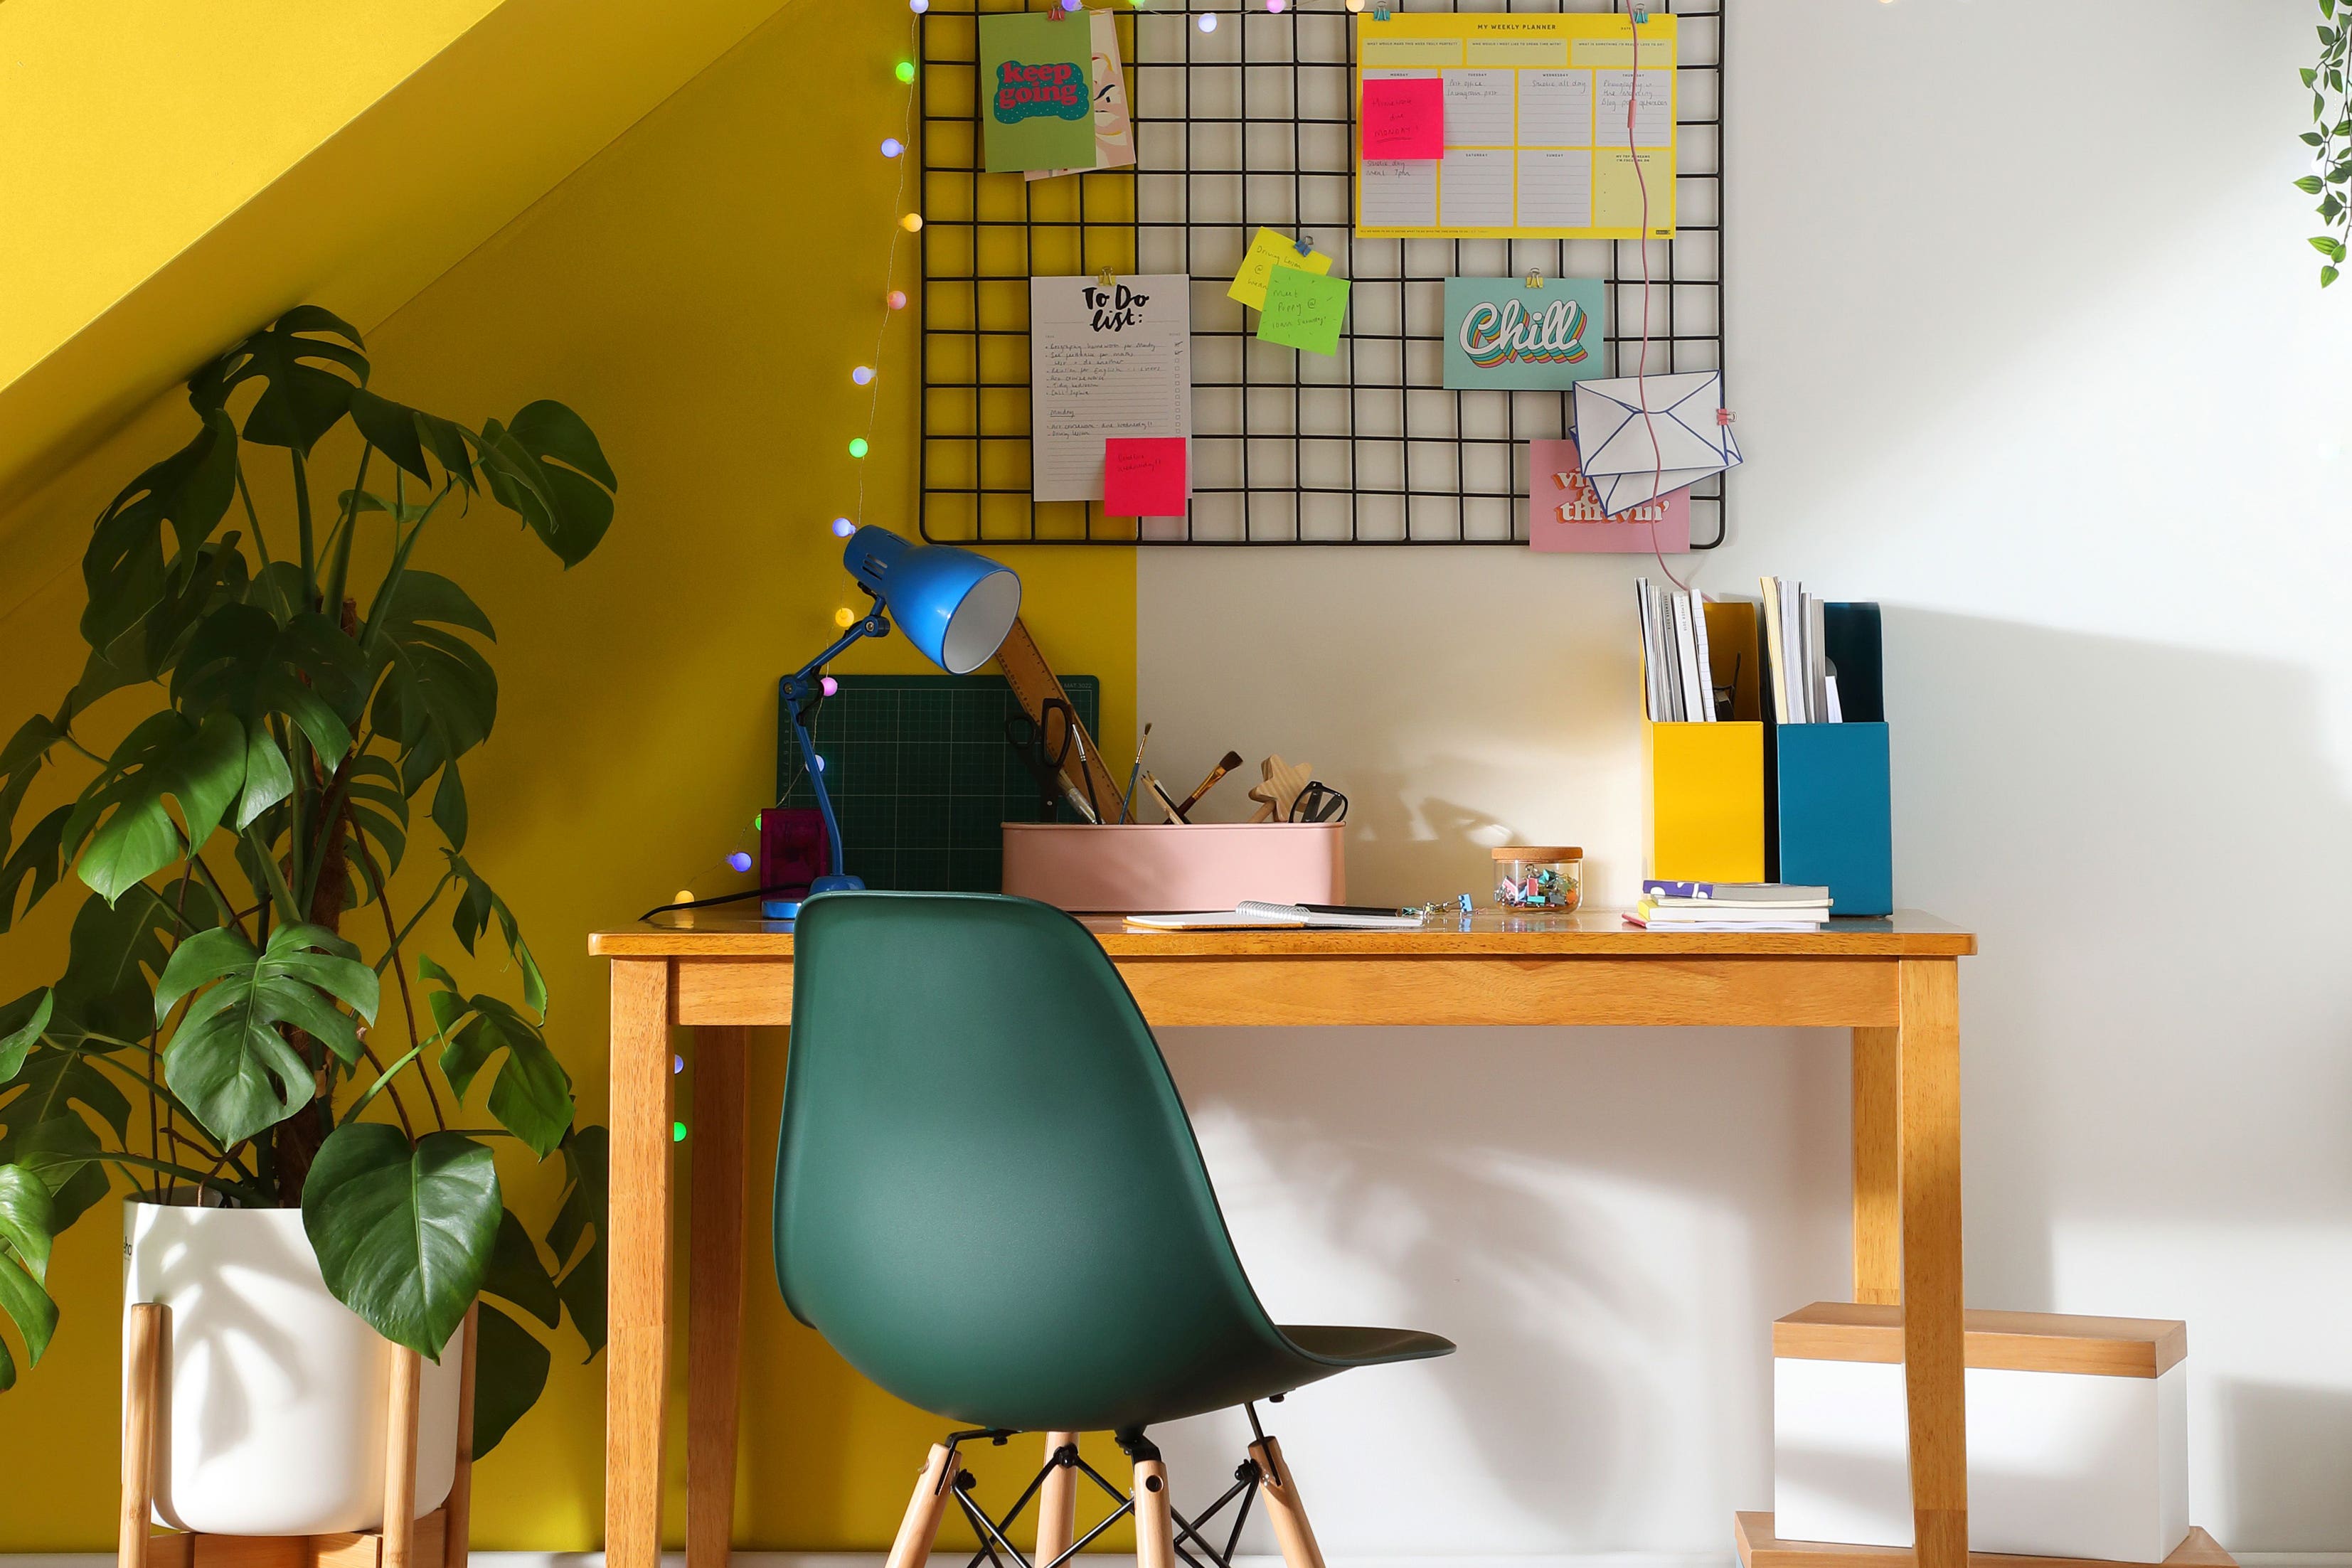 Stylish Home Office Supplies for Your WFH Desk